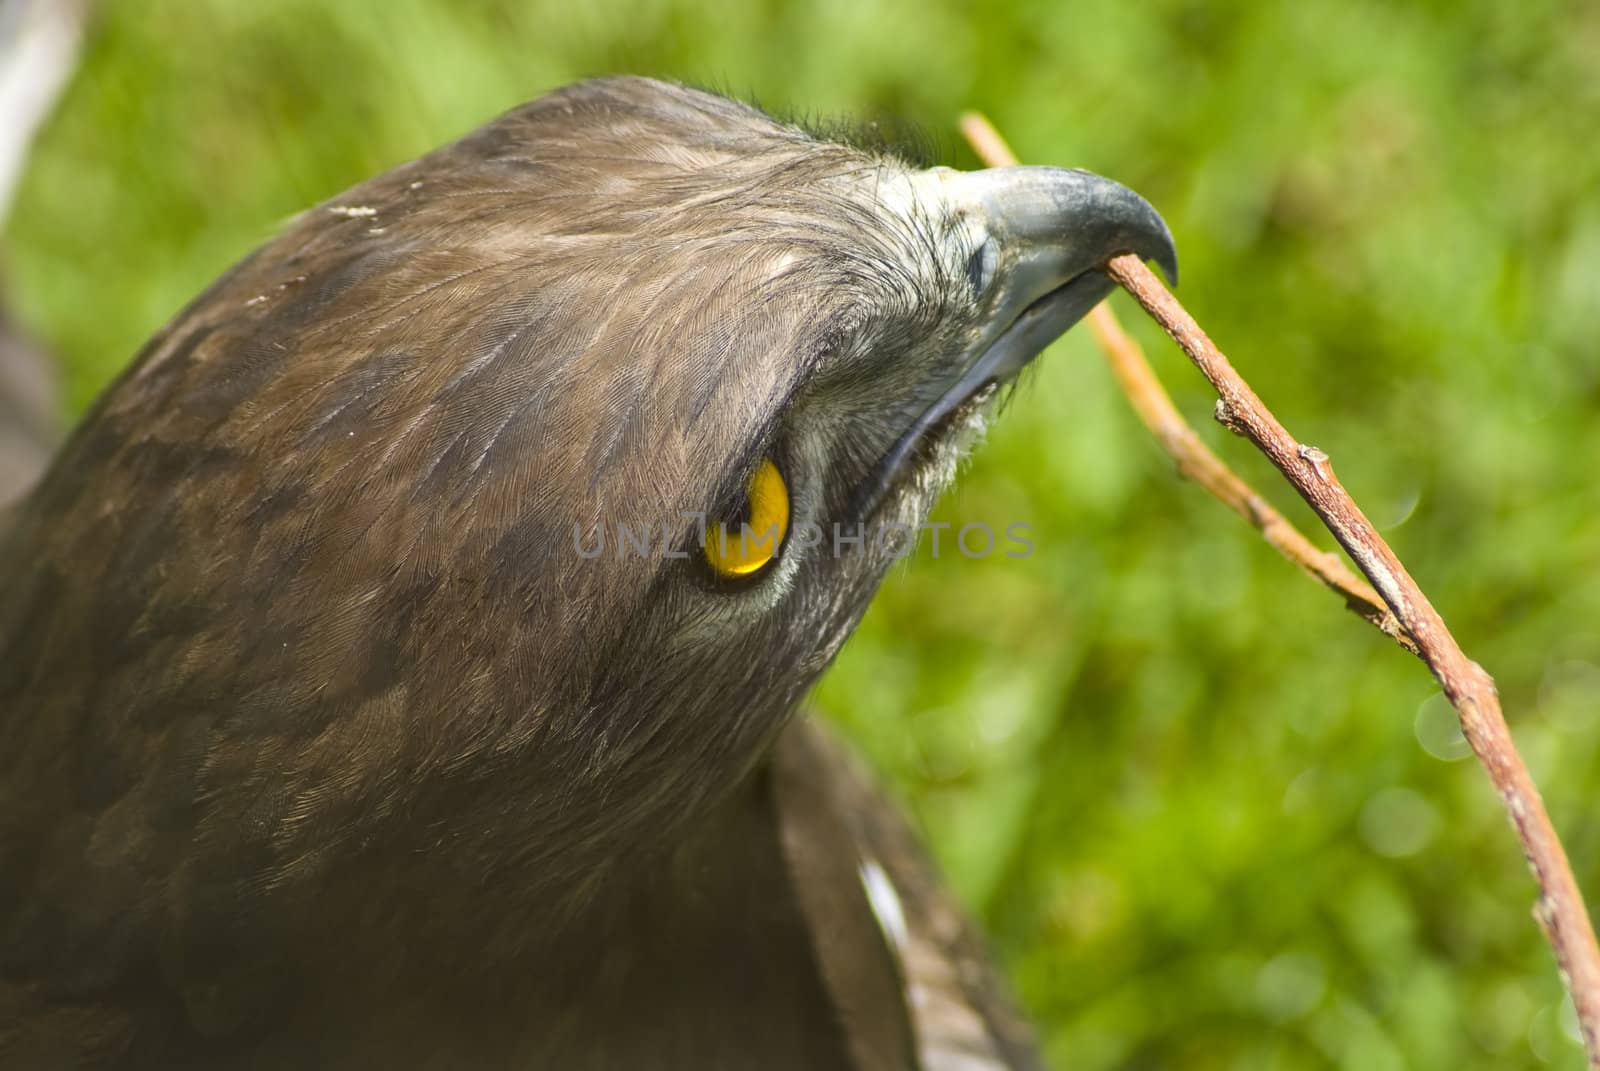 Eagle with twig in mouth by HeinSchlebusch